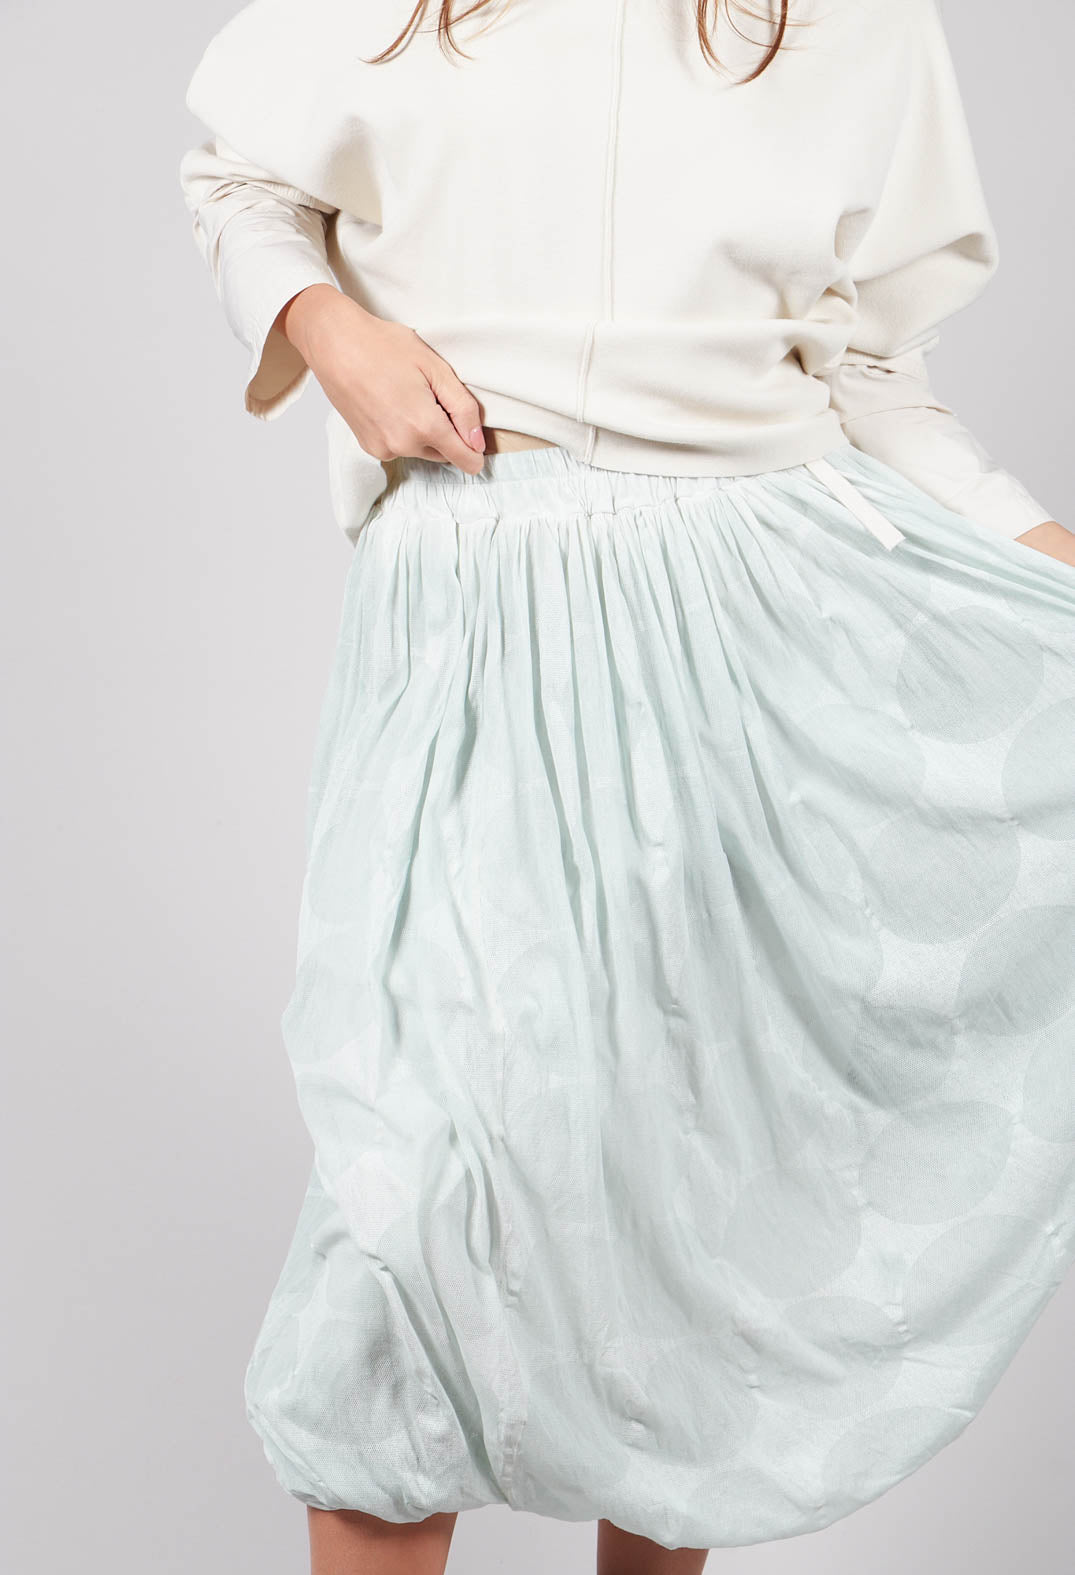 Tulip Shape Skirt with Elasticated Waistband in Mint Print